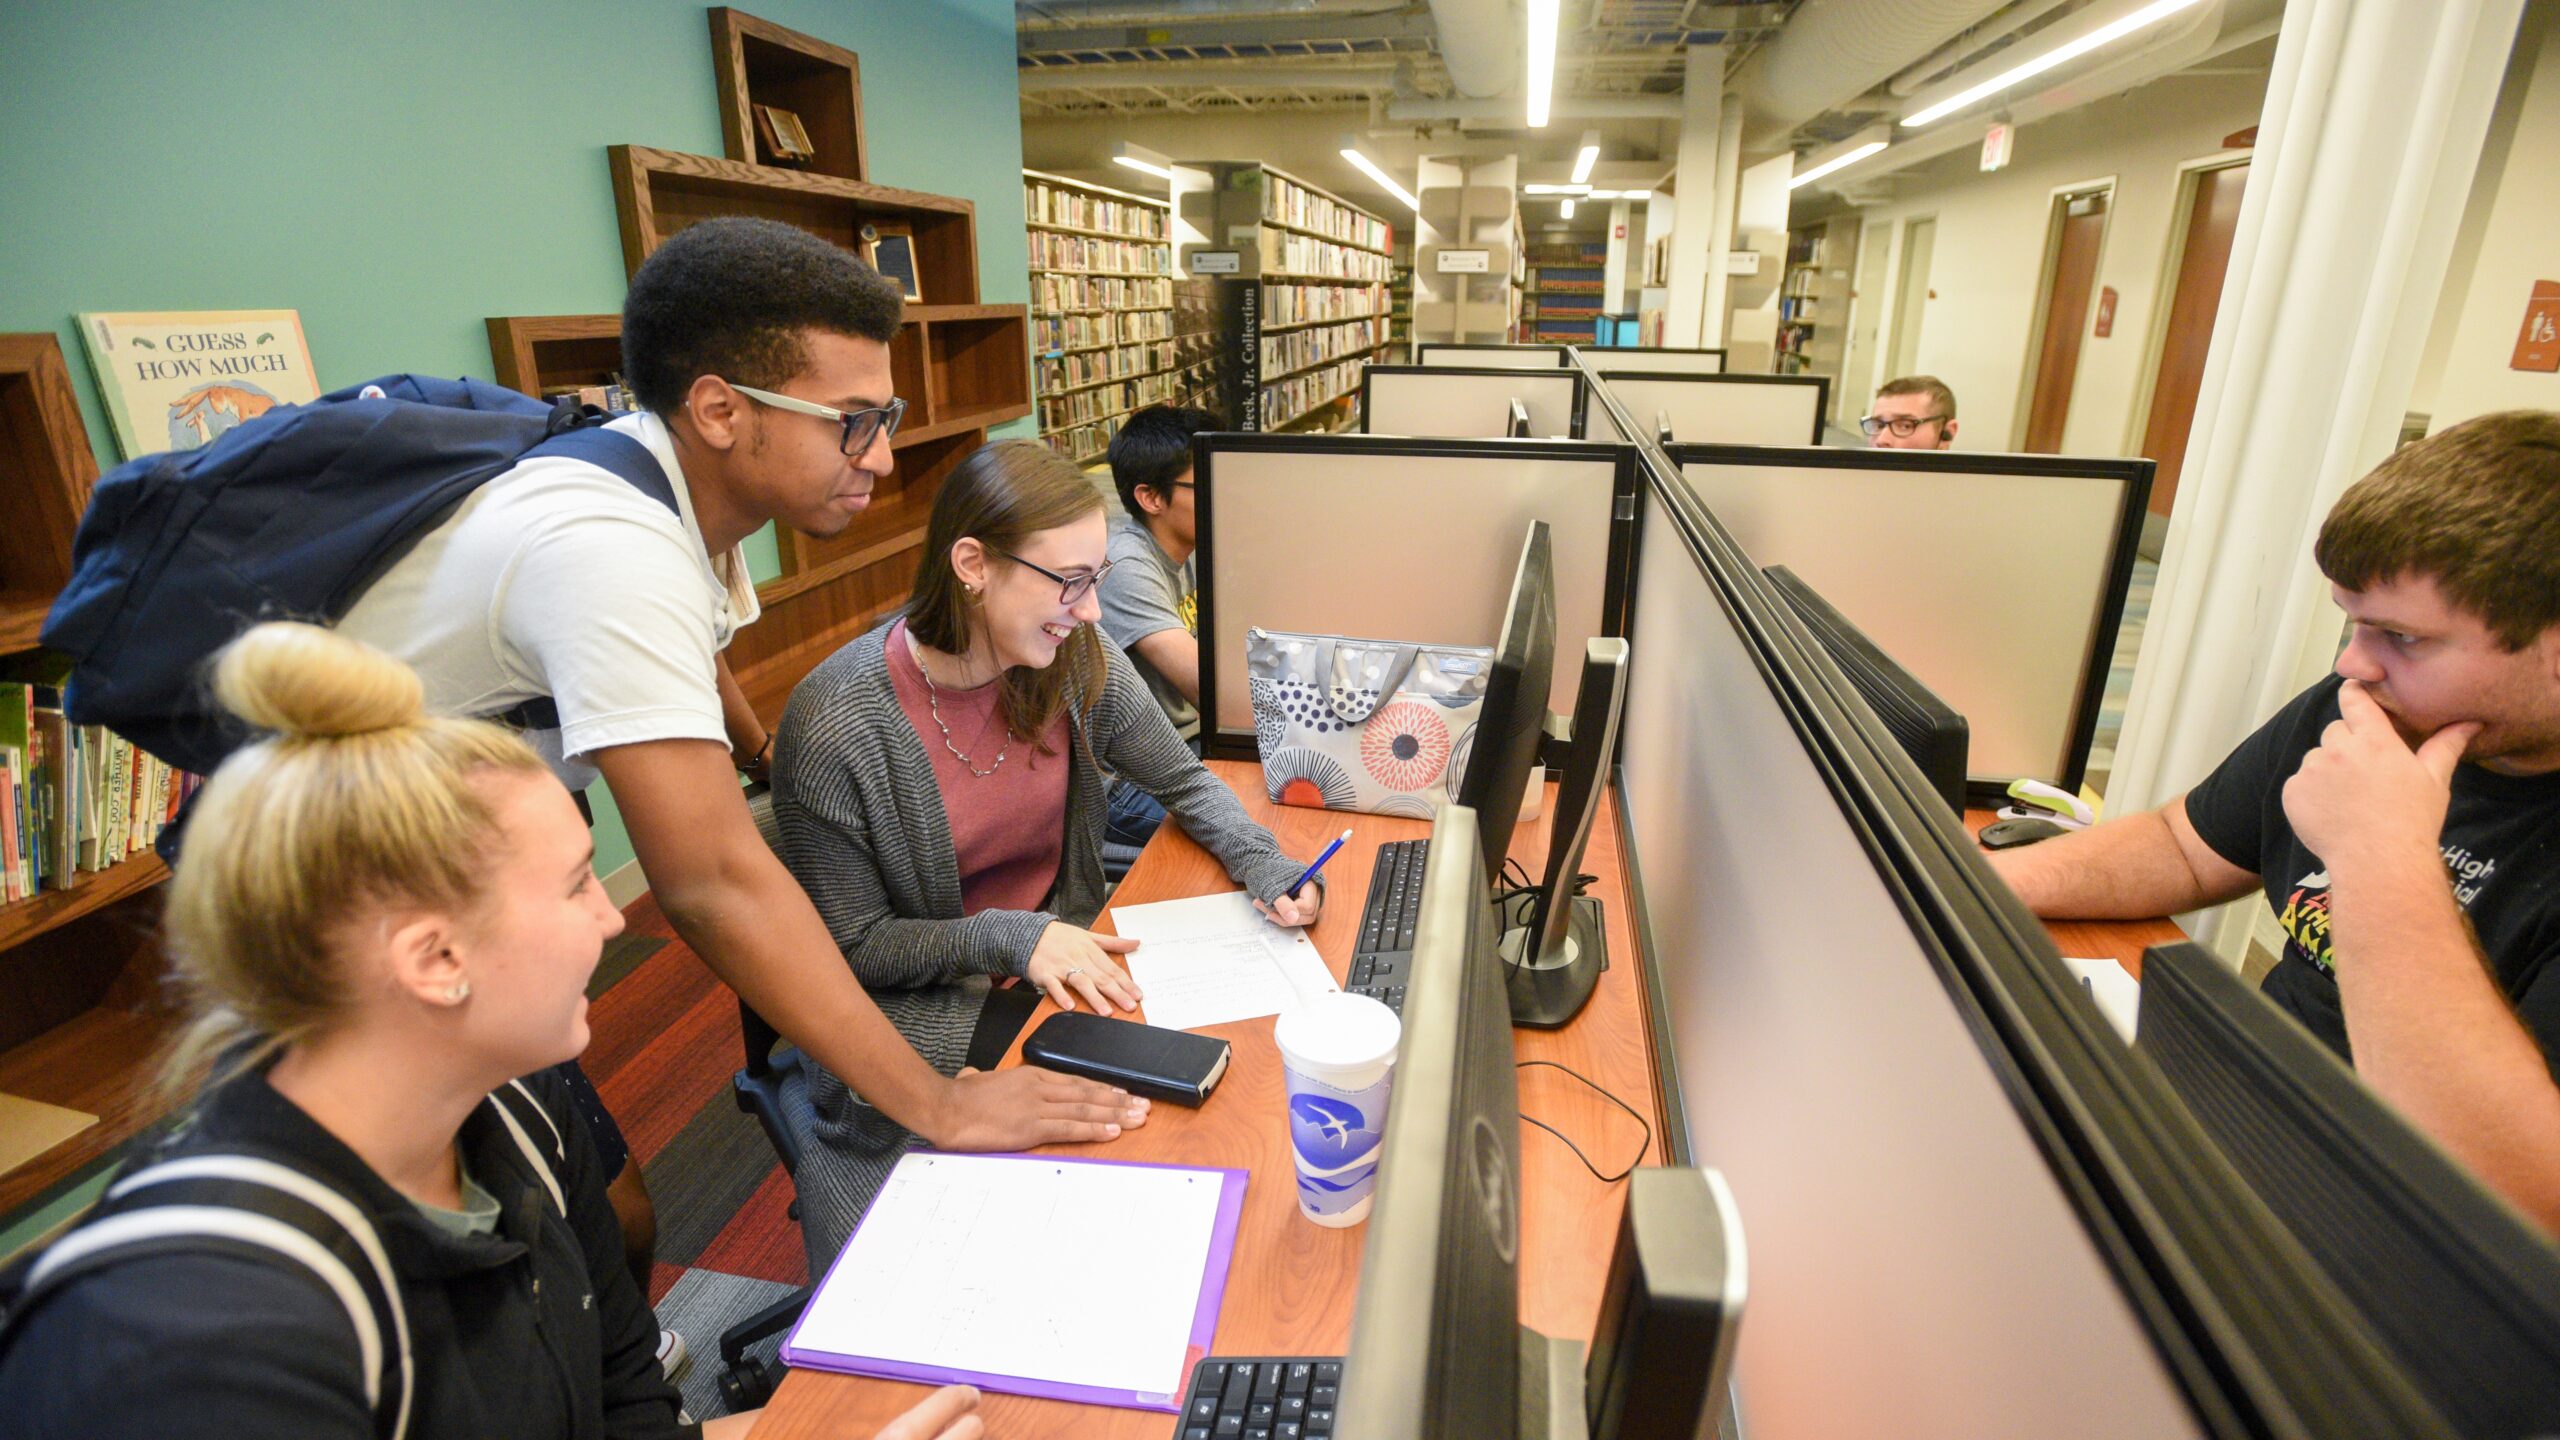 Students studying at a computer in the library.